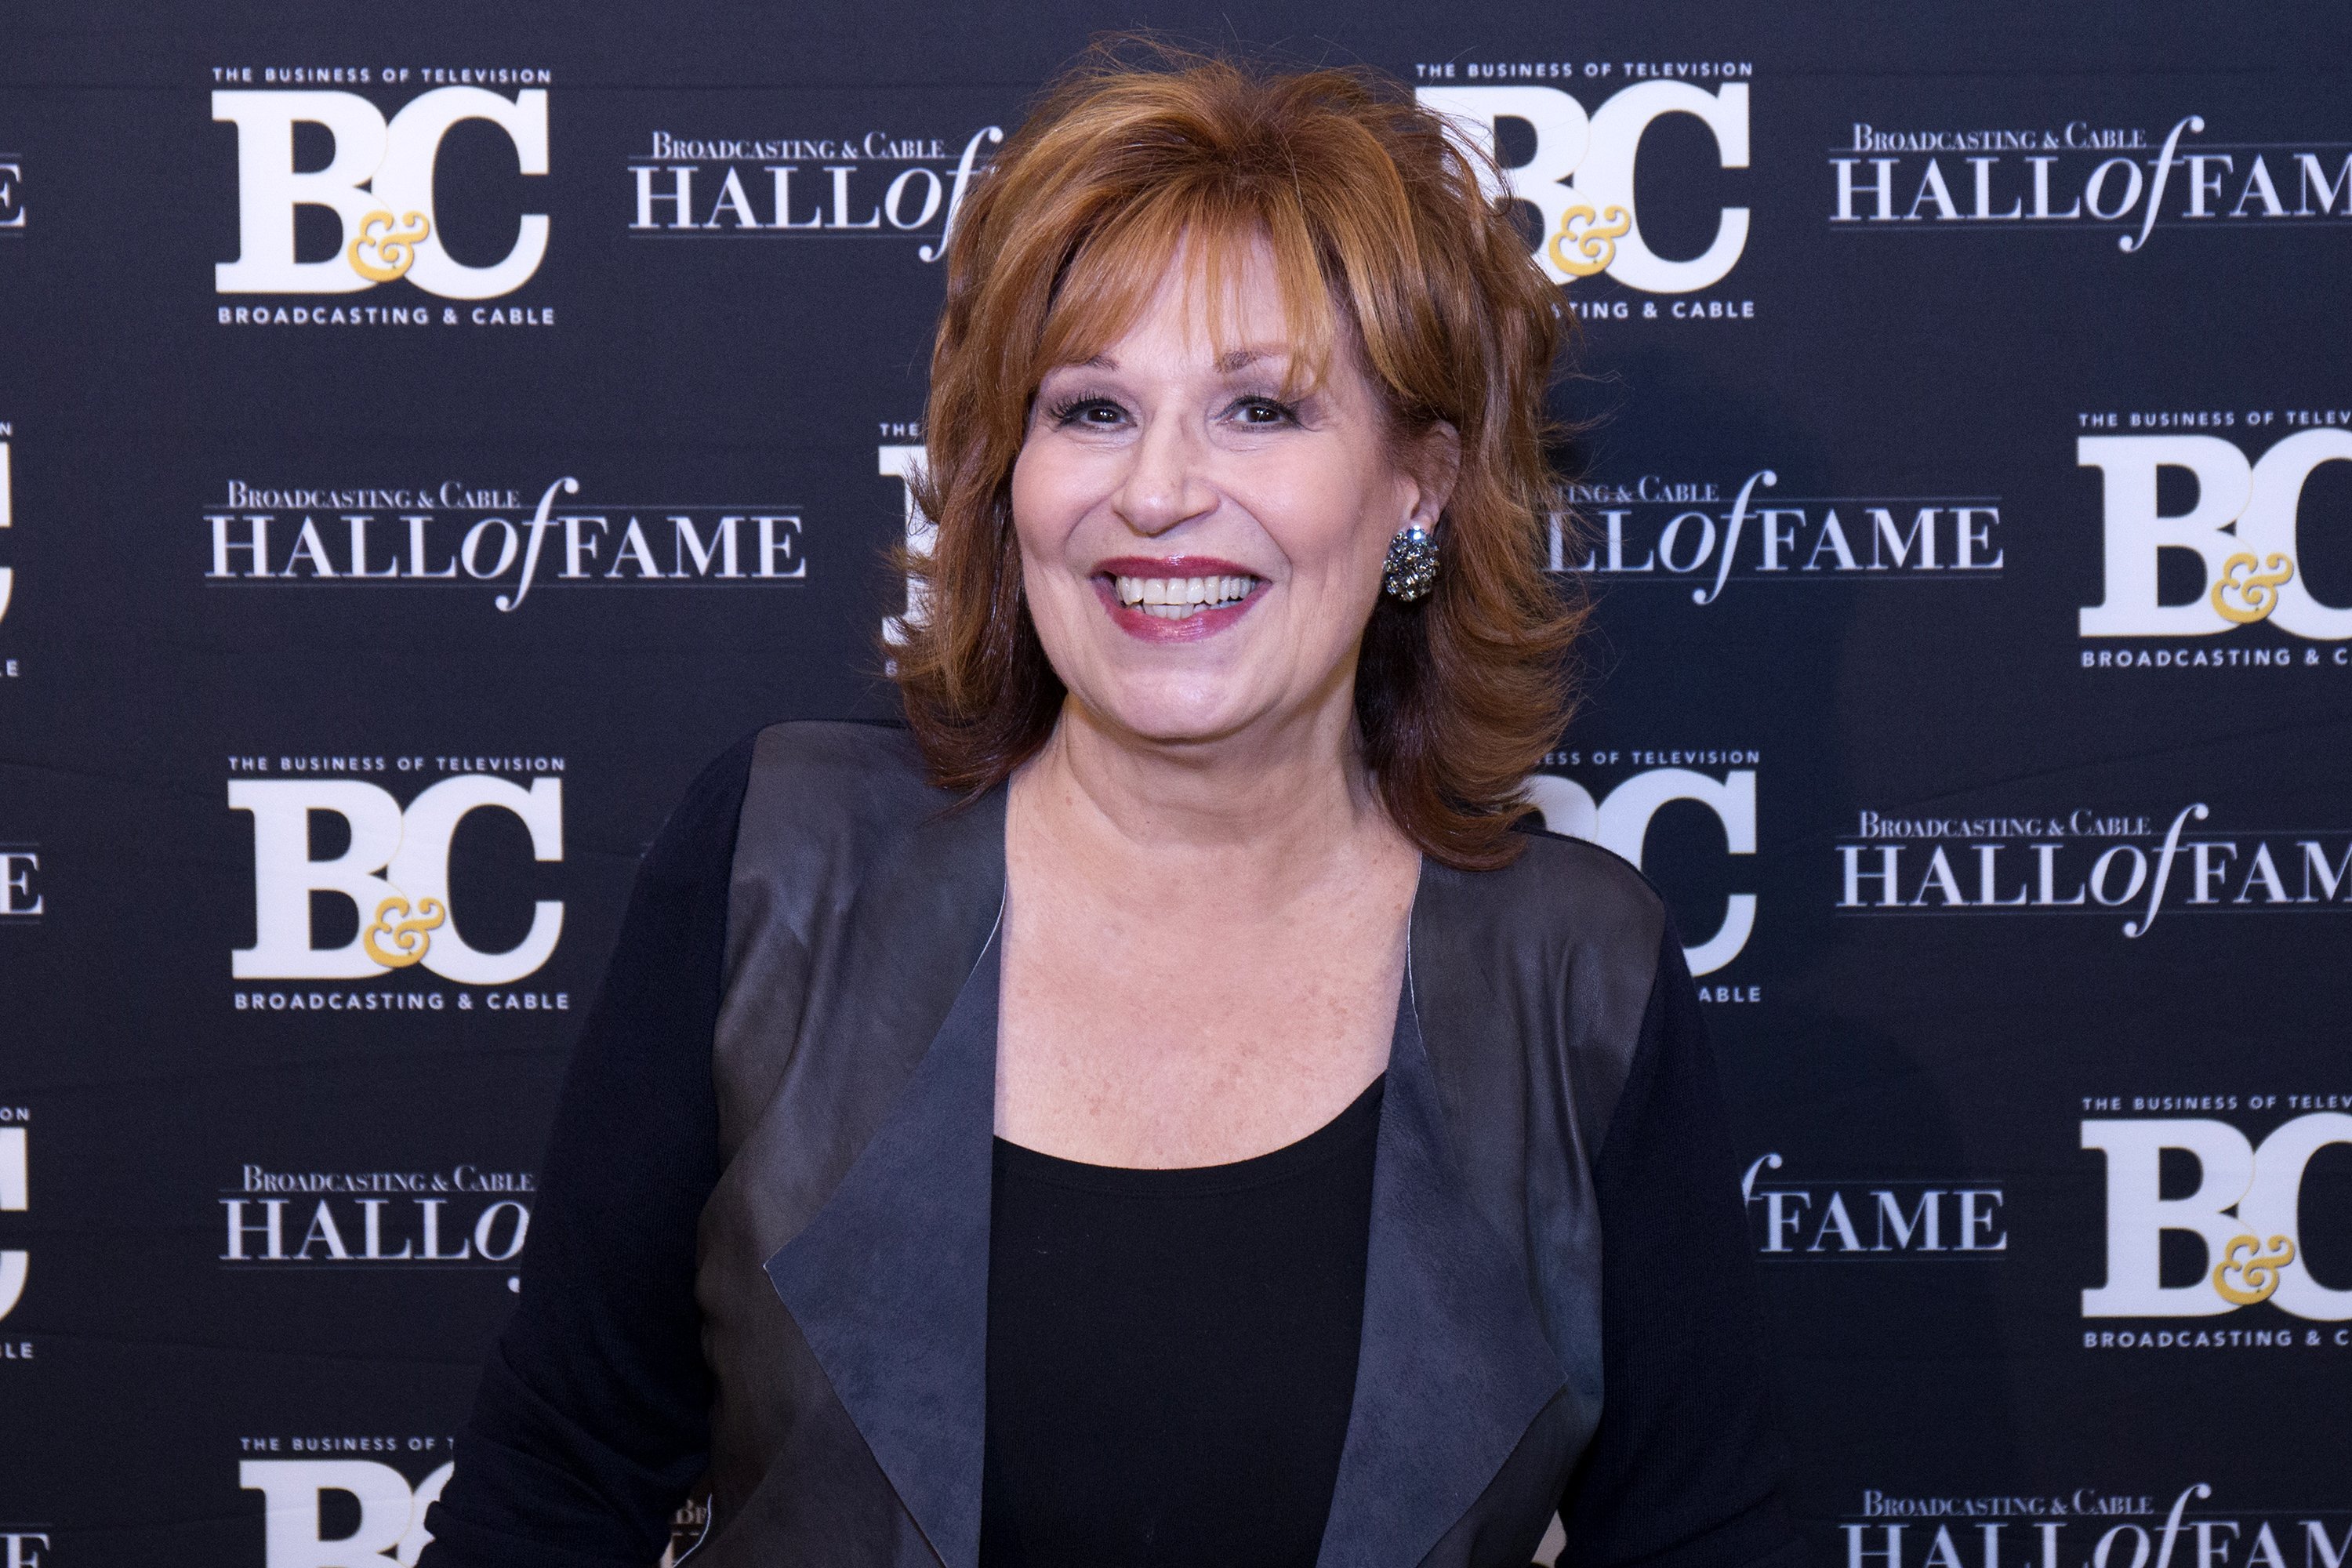 Joy Behar attends the 2017 Broadcasting & Cable Hall Of Fame 27th Anniversary Gala on October 16, 2017. | Photo: GettyImages